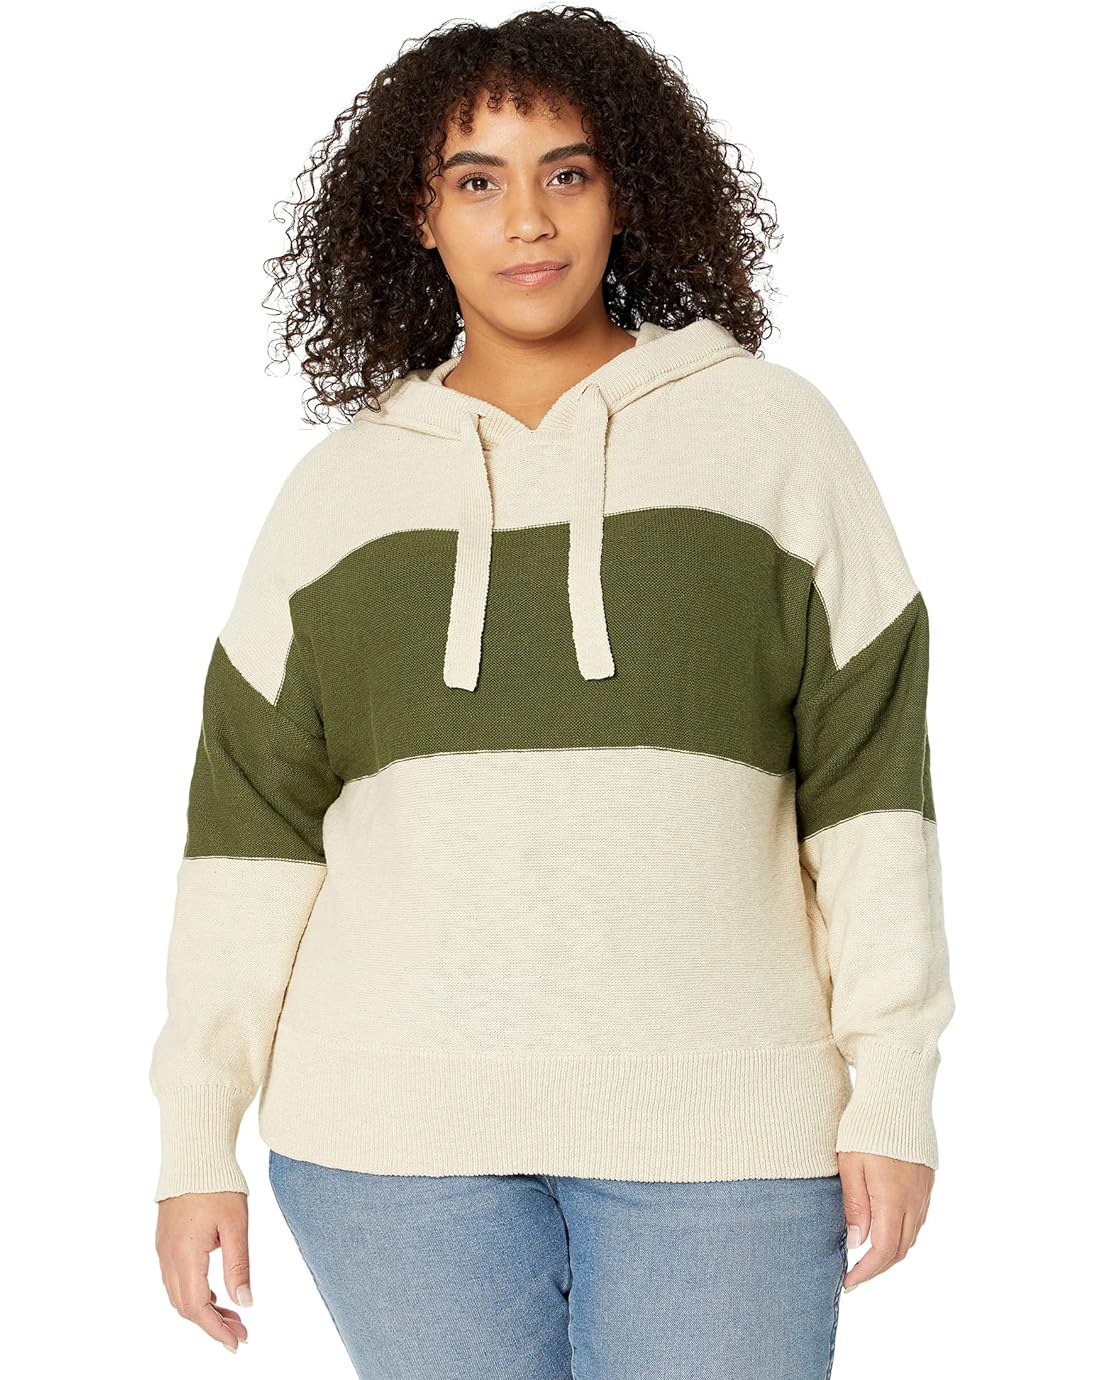 Madewell Plus Clairview Hoodie Sweater in Colorblock